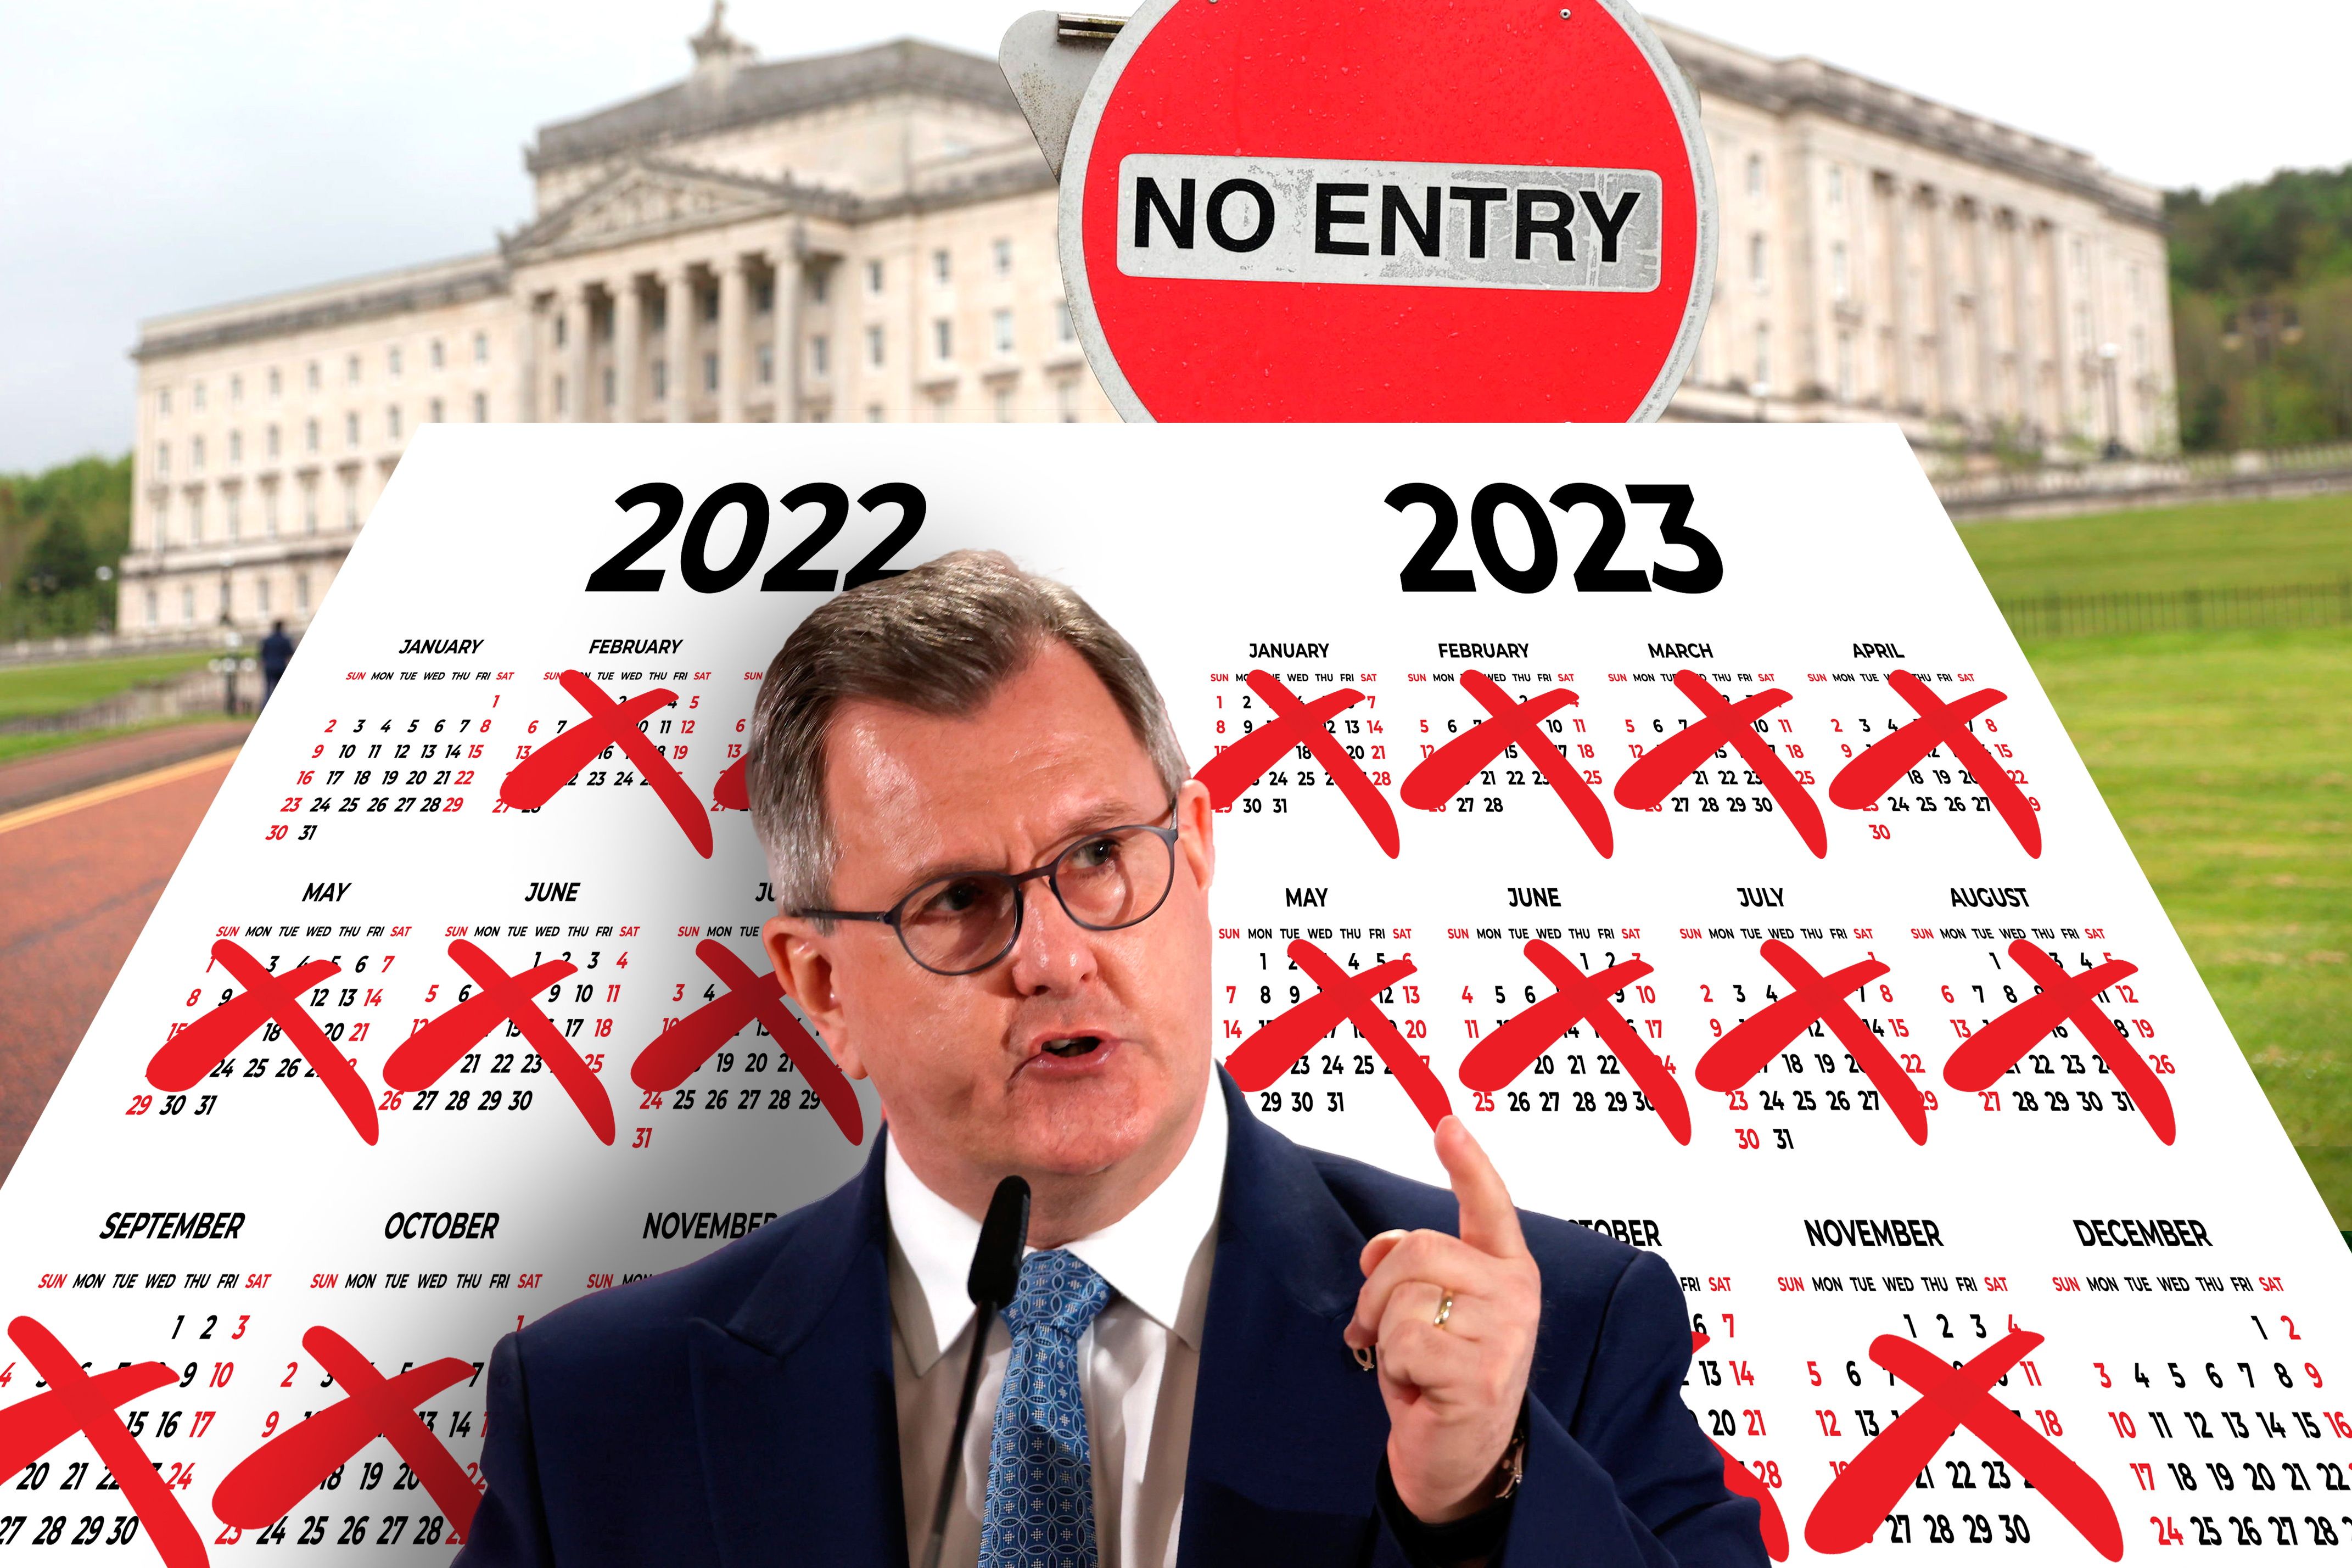 You’re not ‘calendar-led’ Sir Jeffrey, but many are as Stormont deadlock ‘forcing people to take issues into own hands’